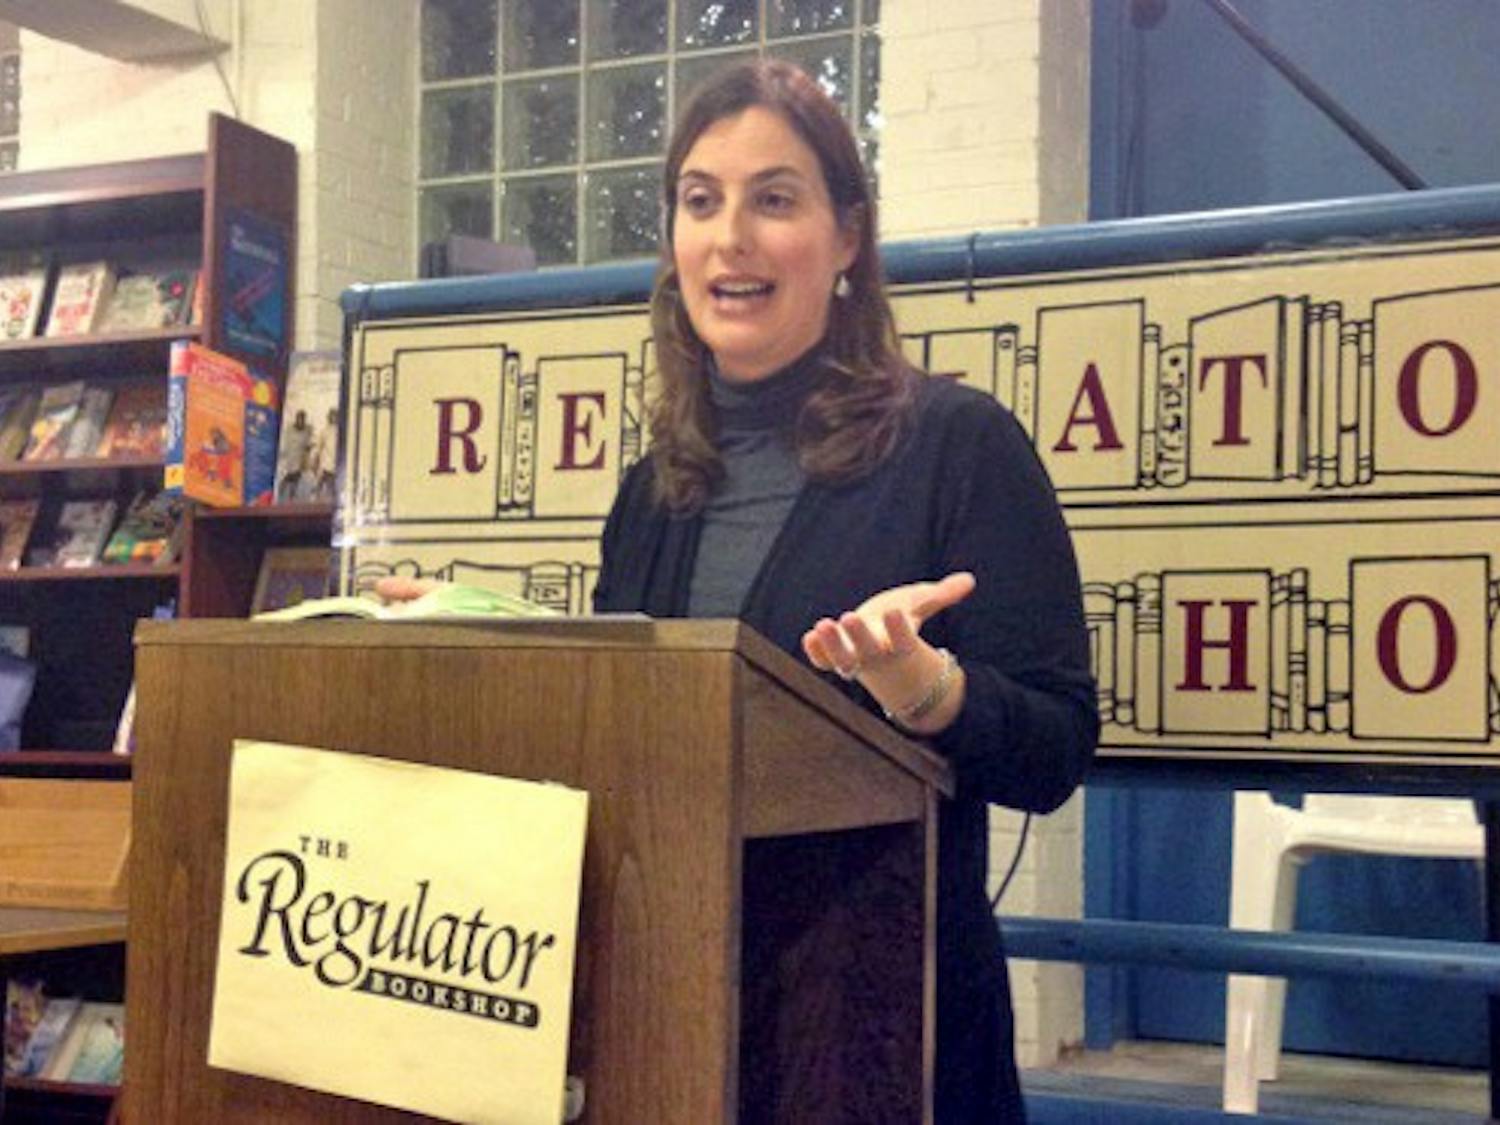 Katie Becker, a Divinity School alumna, read from her memoir on love and religion Tuesday night.